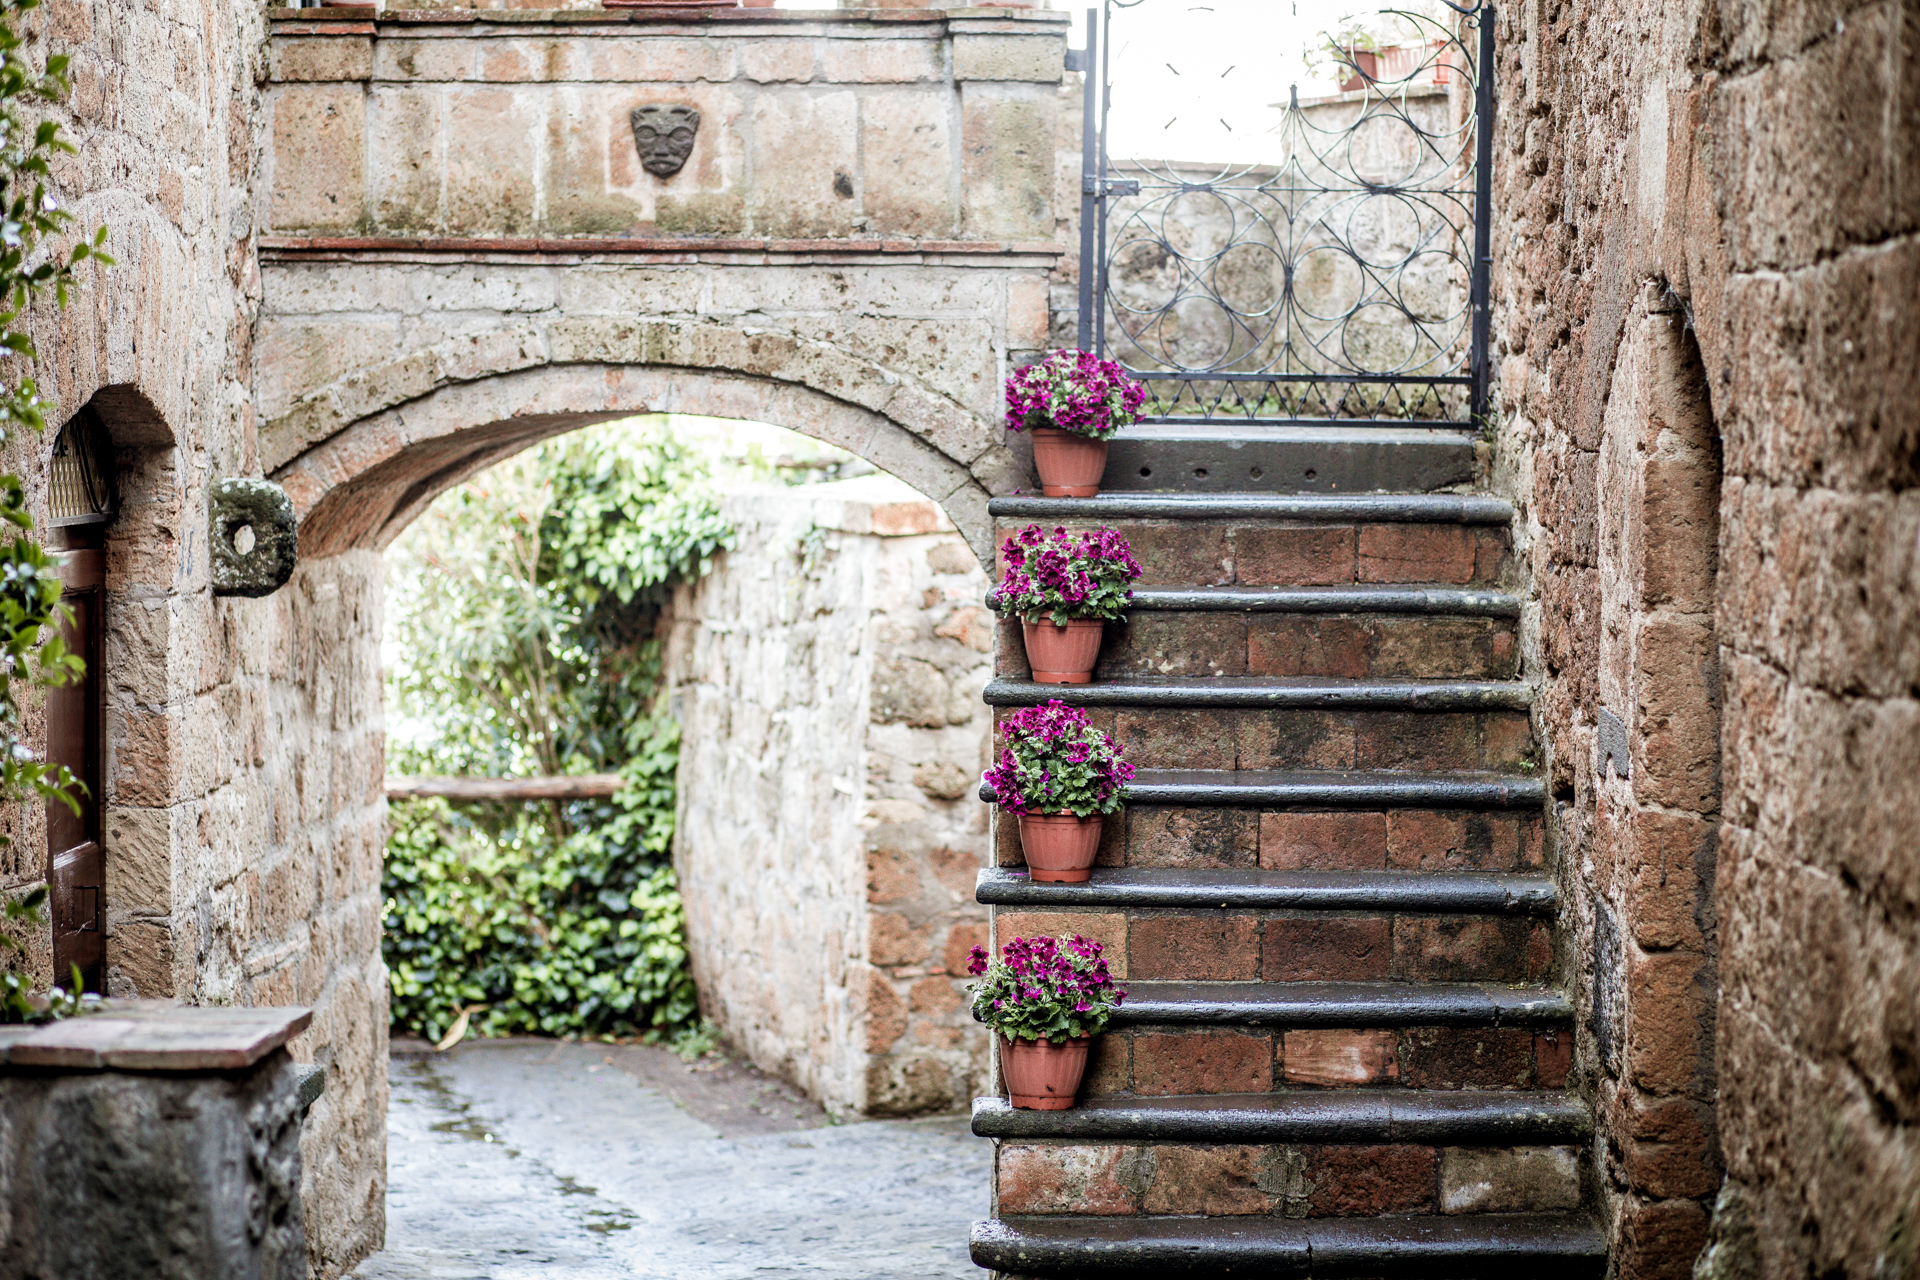 10 Gorgeous Views in Tuscany Italy | Tuscany Photos by popular New England travel blogger, Shannon Shipman: image of a stone staircase in Tuscany, Italy with terra cotta pots resting on each step and containing purple flowers. 